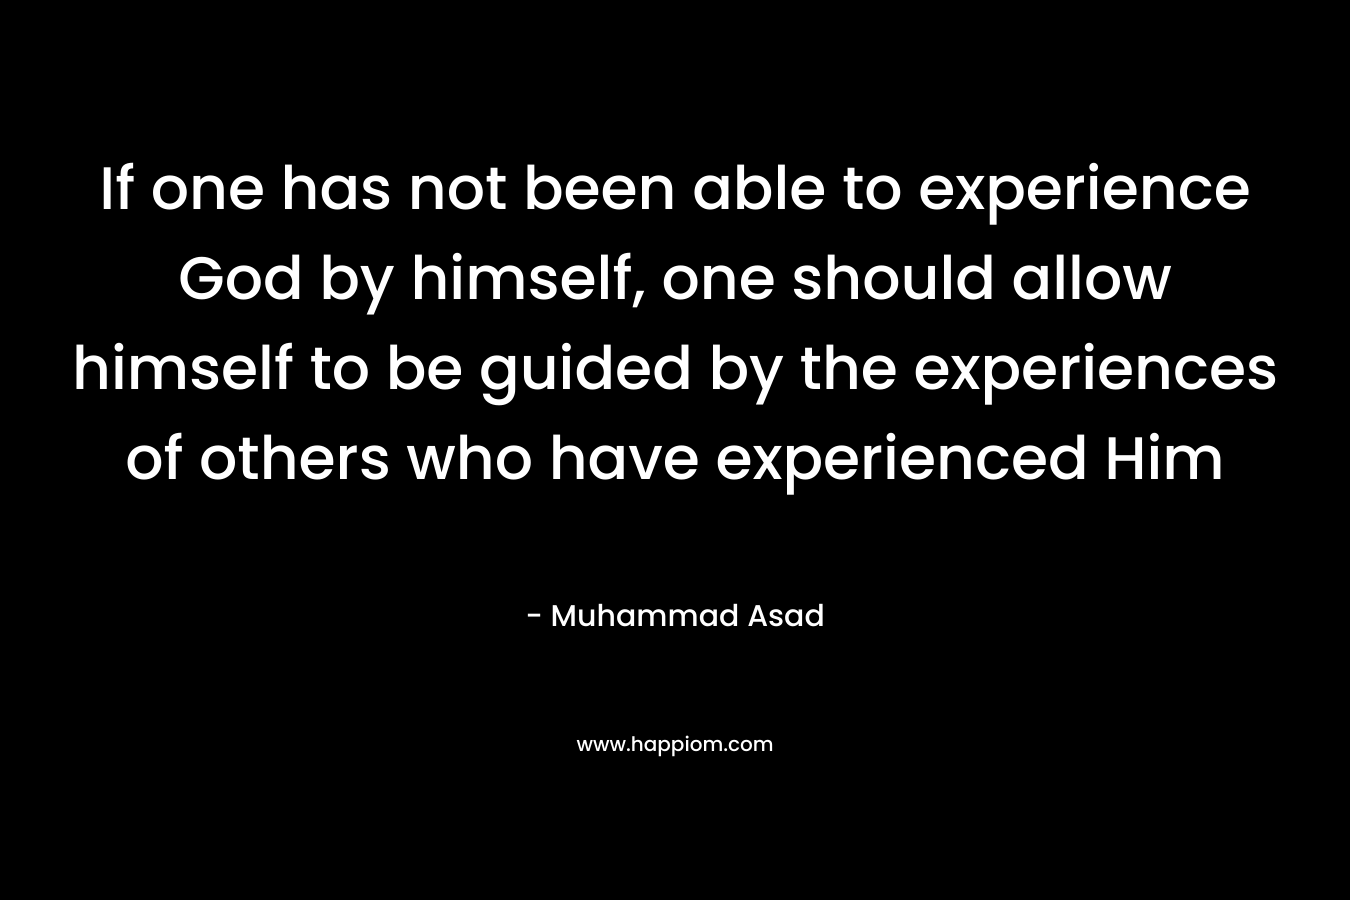 If one has not been able to experience God by himself, one should allow himself to be guided by the experiences of others who have experienced Him – Muhammad Asad